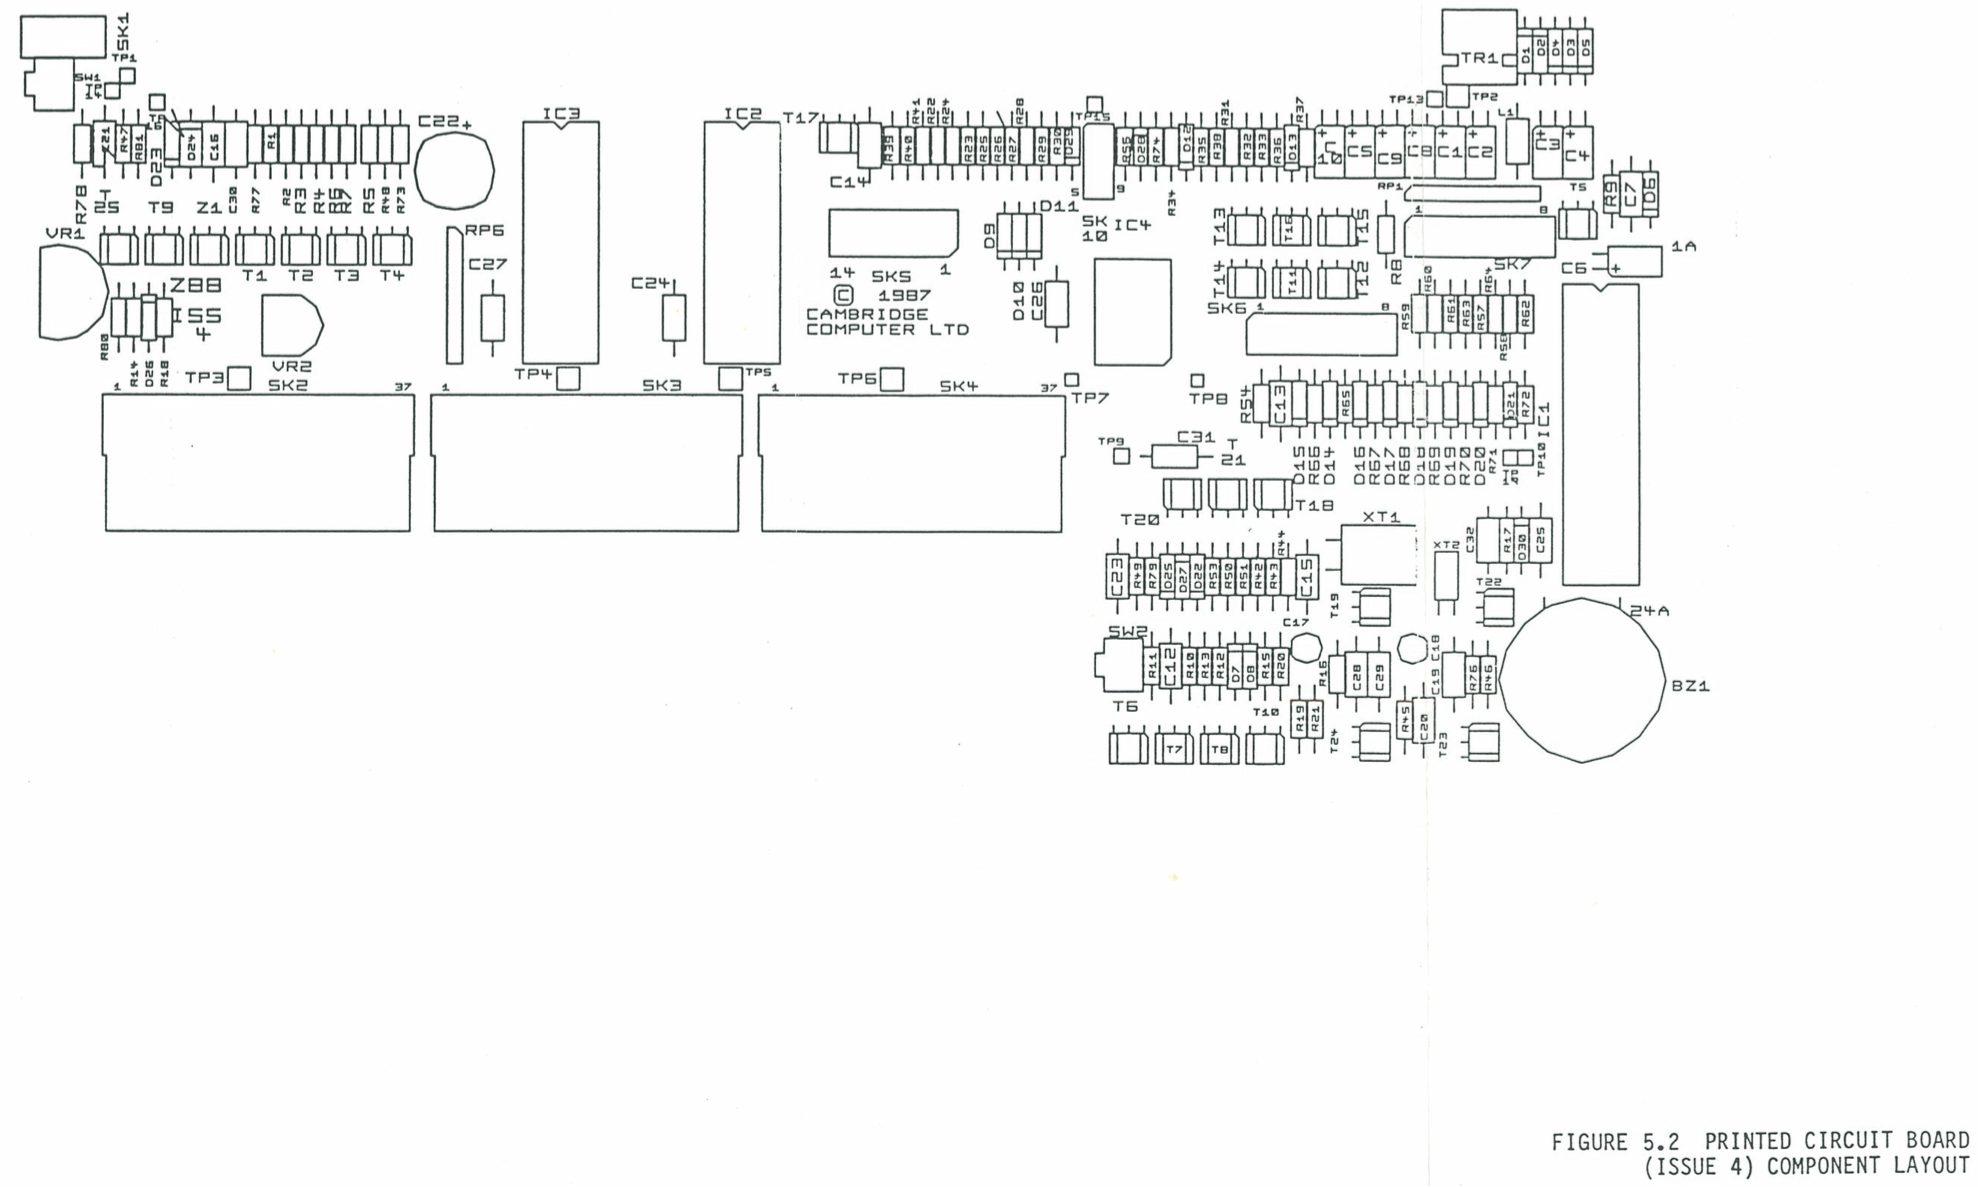 Printed Circuit Board (Issue 4) Component Layout